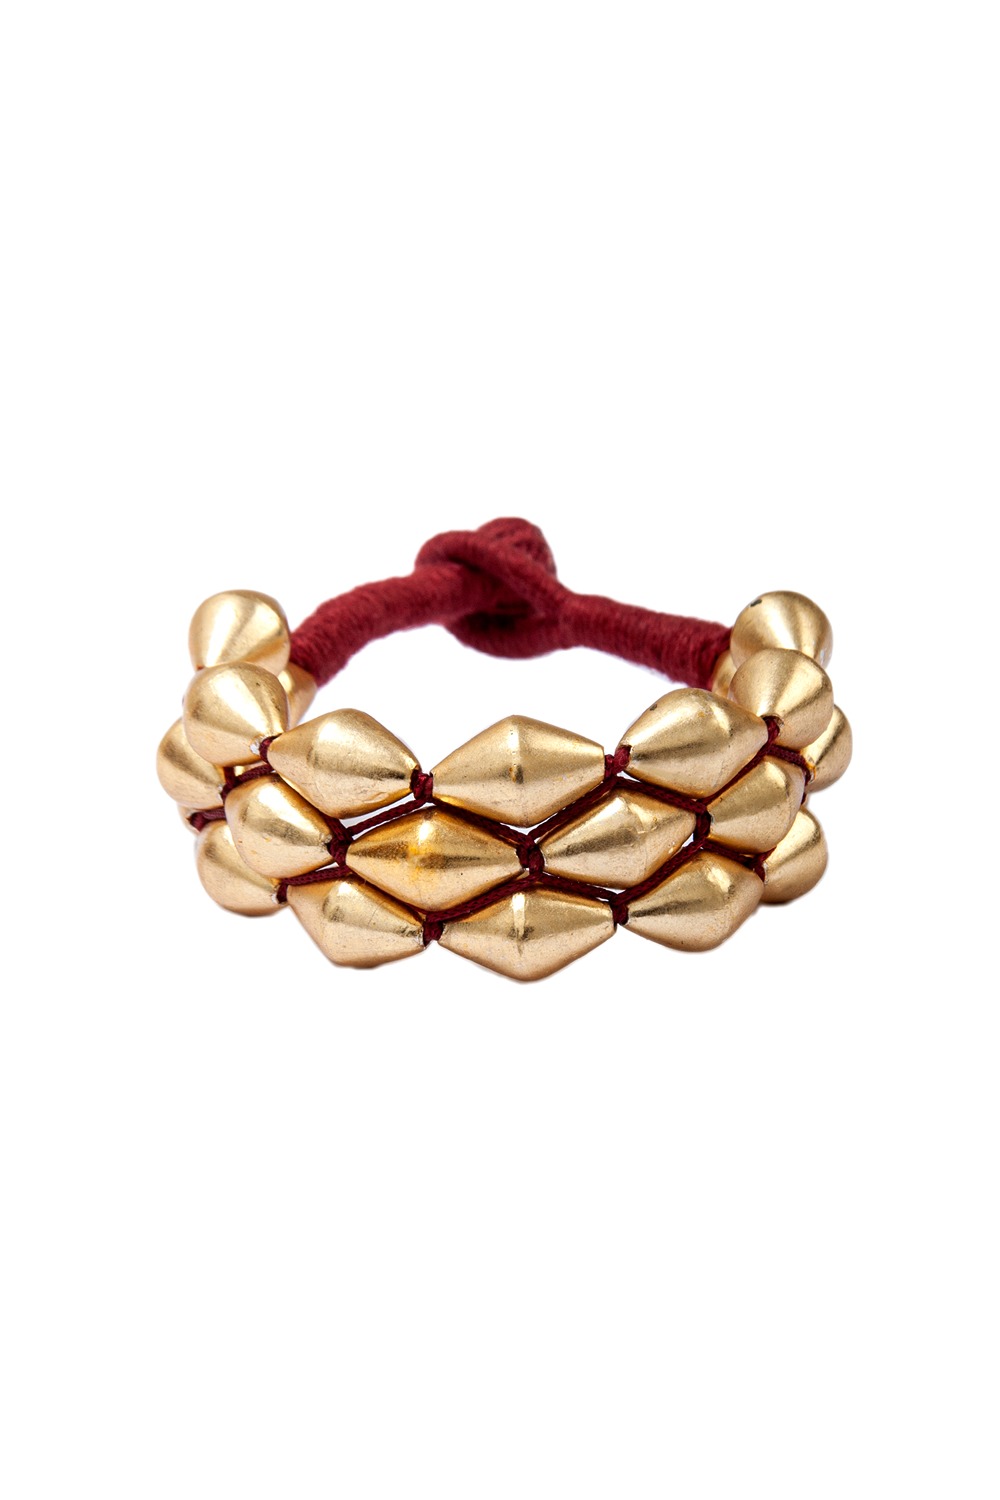 NEETA BOOCHRA presents 925 Sterling Silver Gold Plated Dholki Paunchi  Bracelet (Dholki Bead Size – Big) exclusively available at FEI